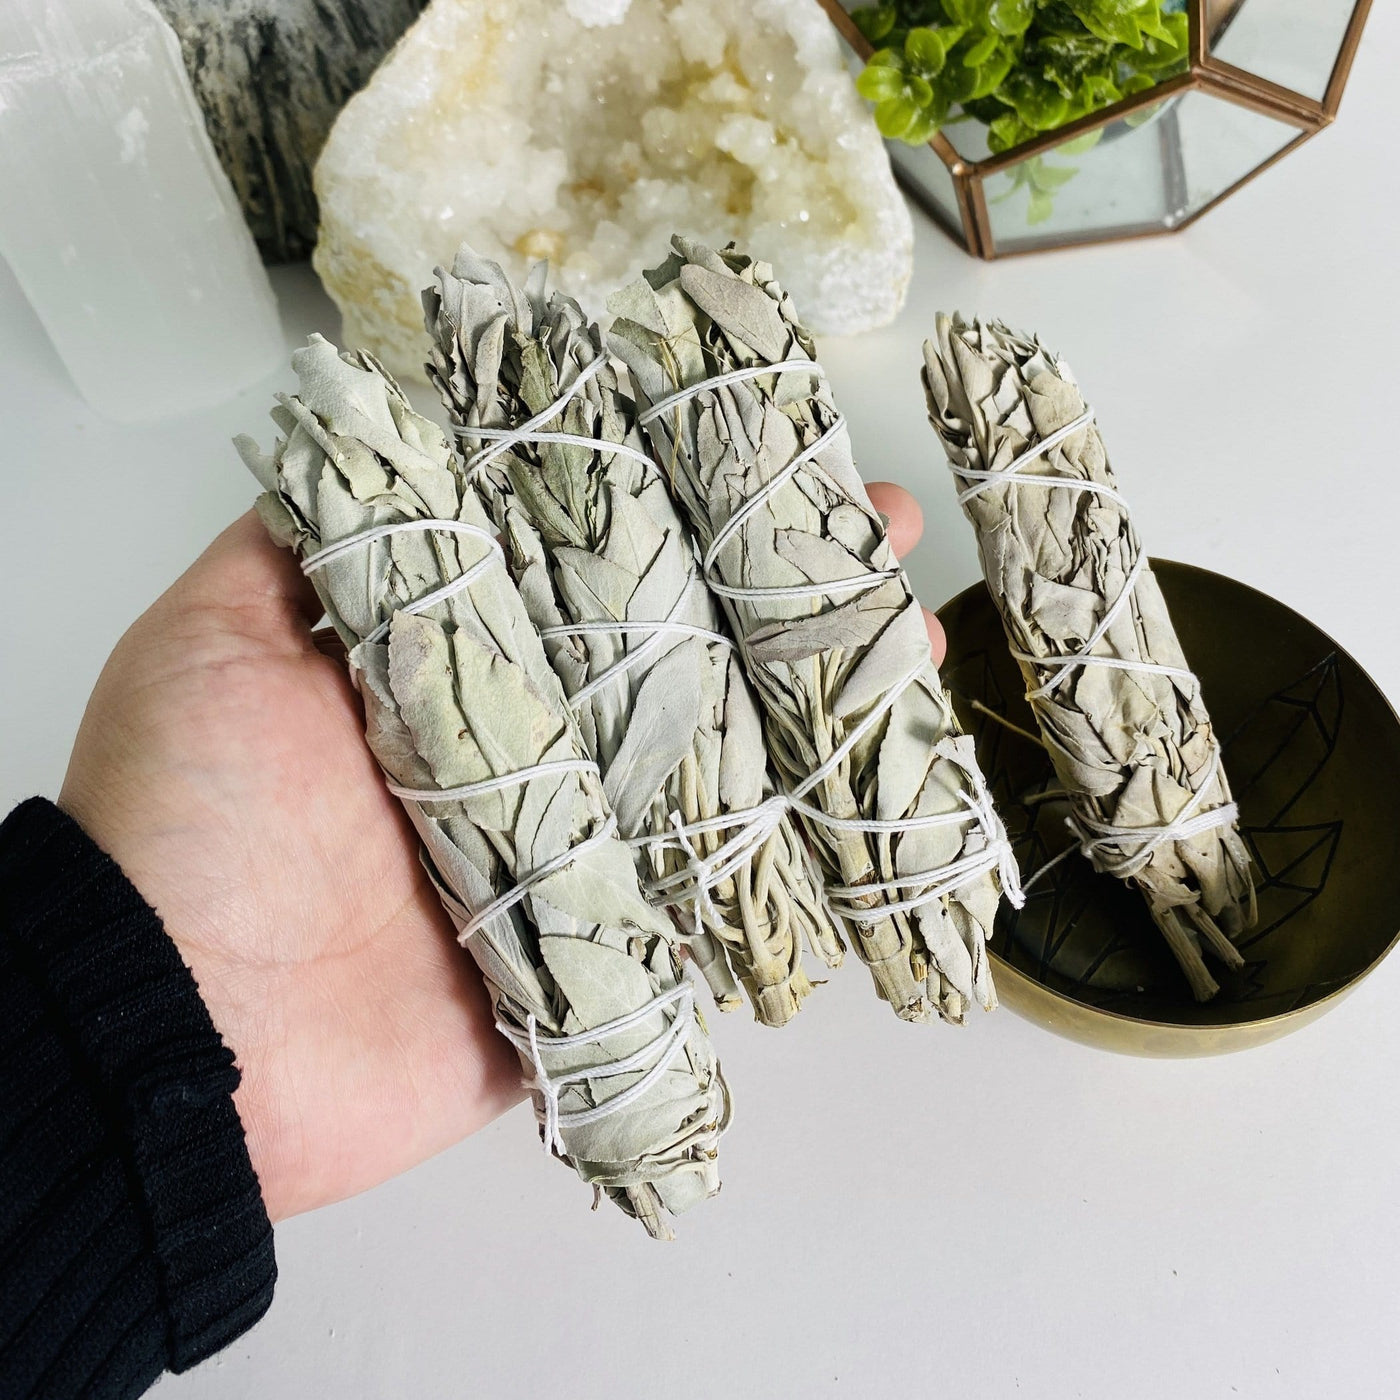 Three White Sage Sticks pictured in hand and one other stick is in a brass bowl.